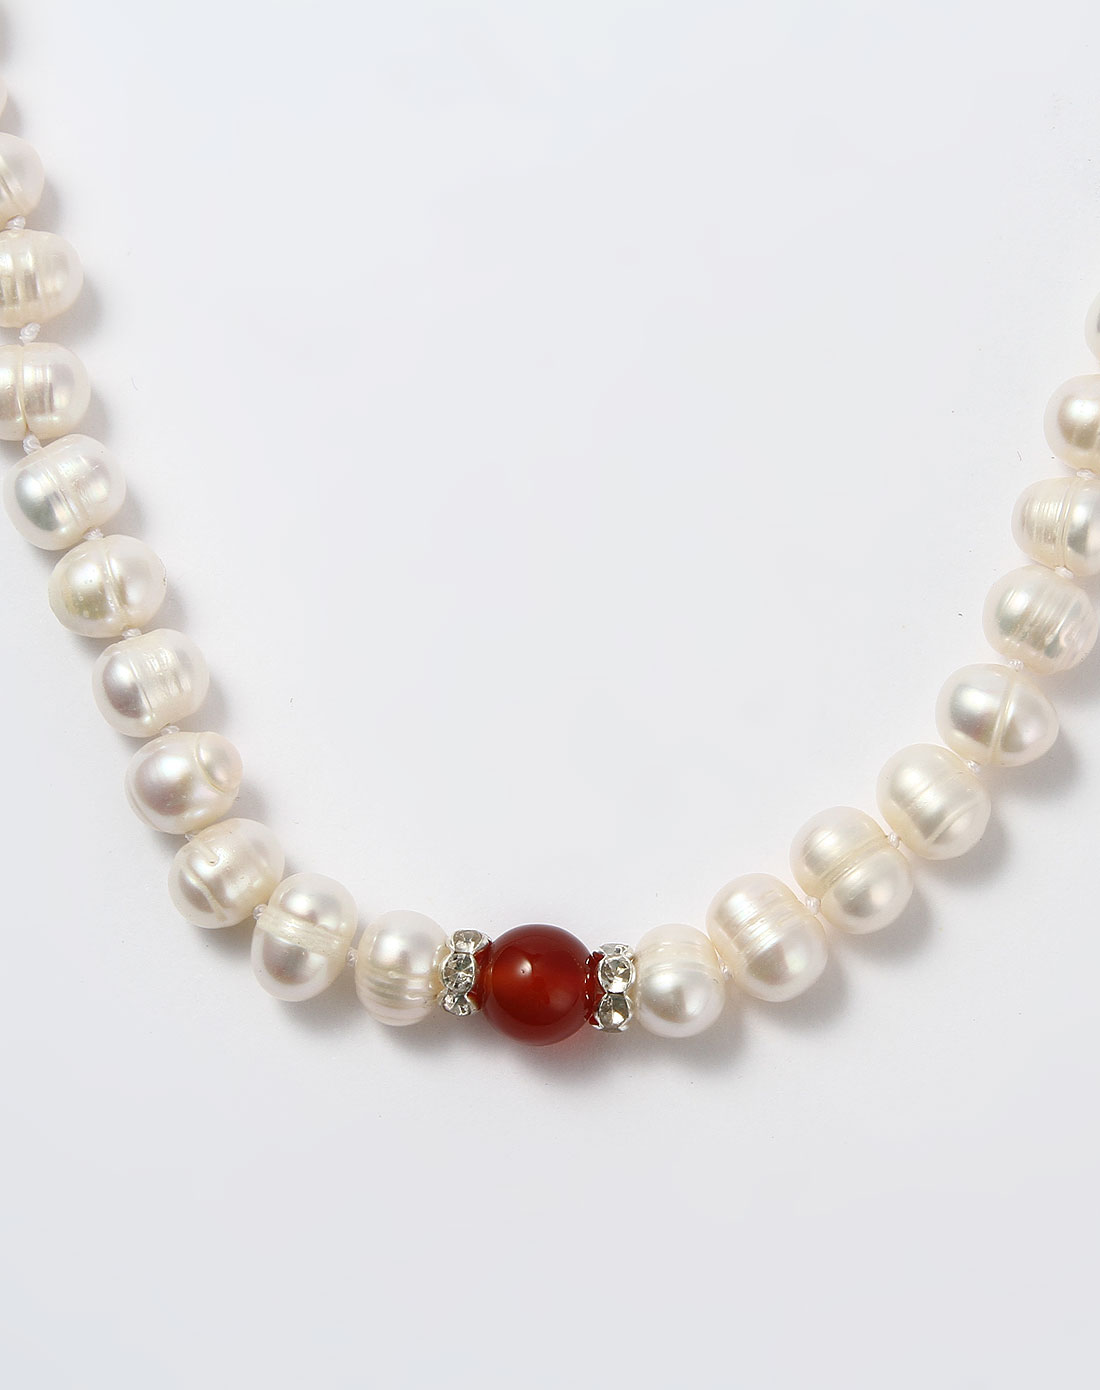 Pearl fancy fashion necklace